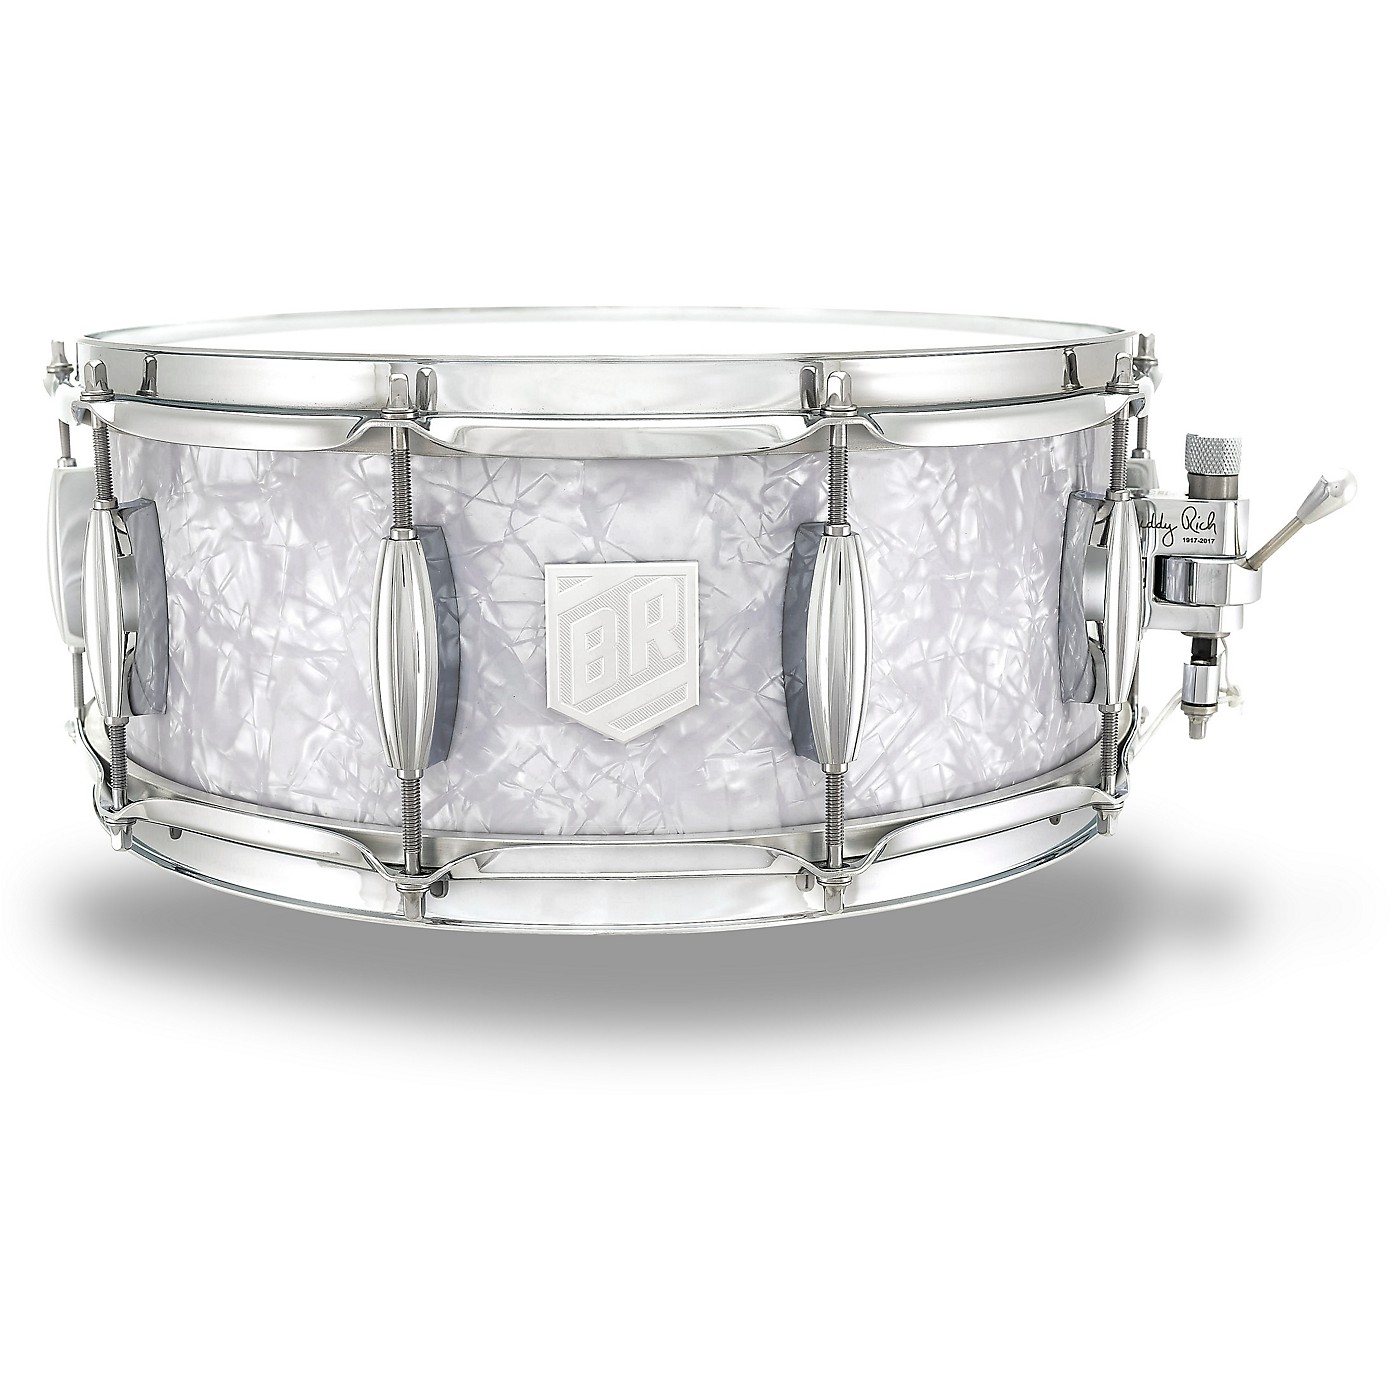 Trick Buddy Rich 100th Anniversary Snare Drum thumbnail